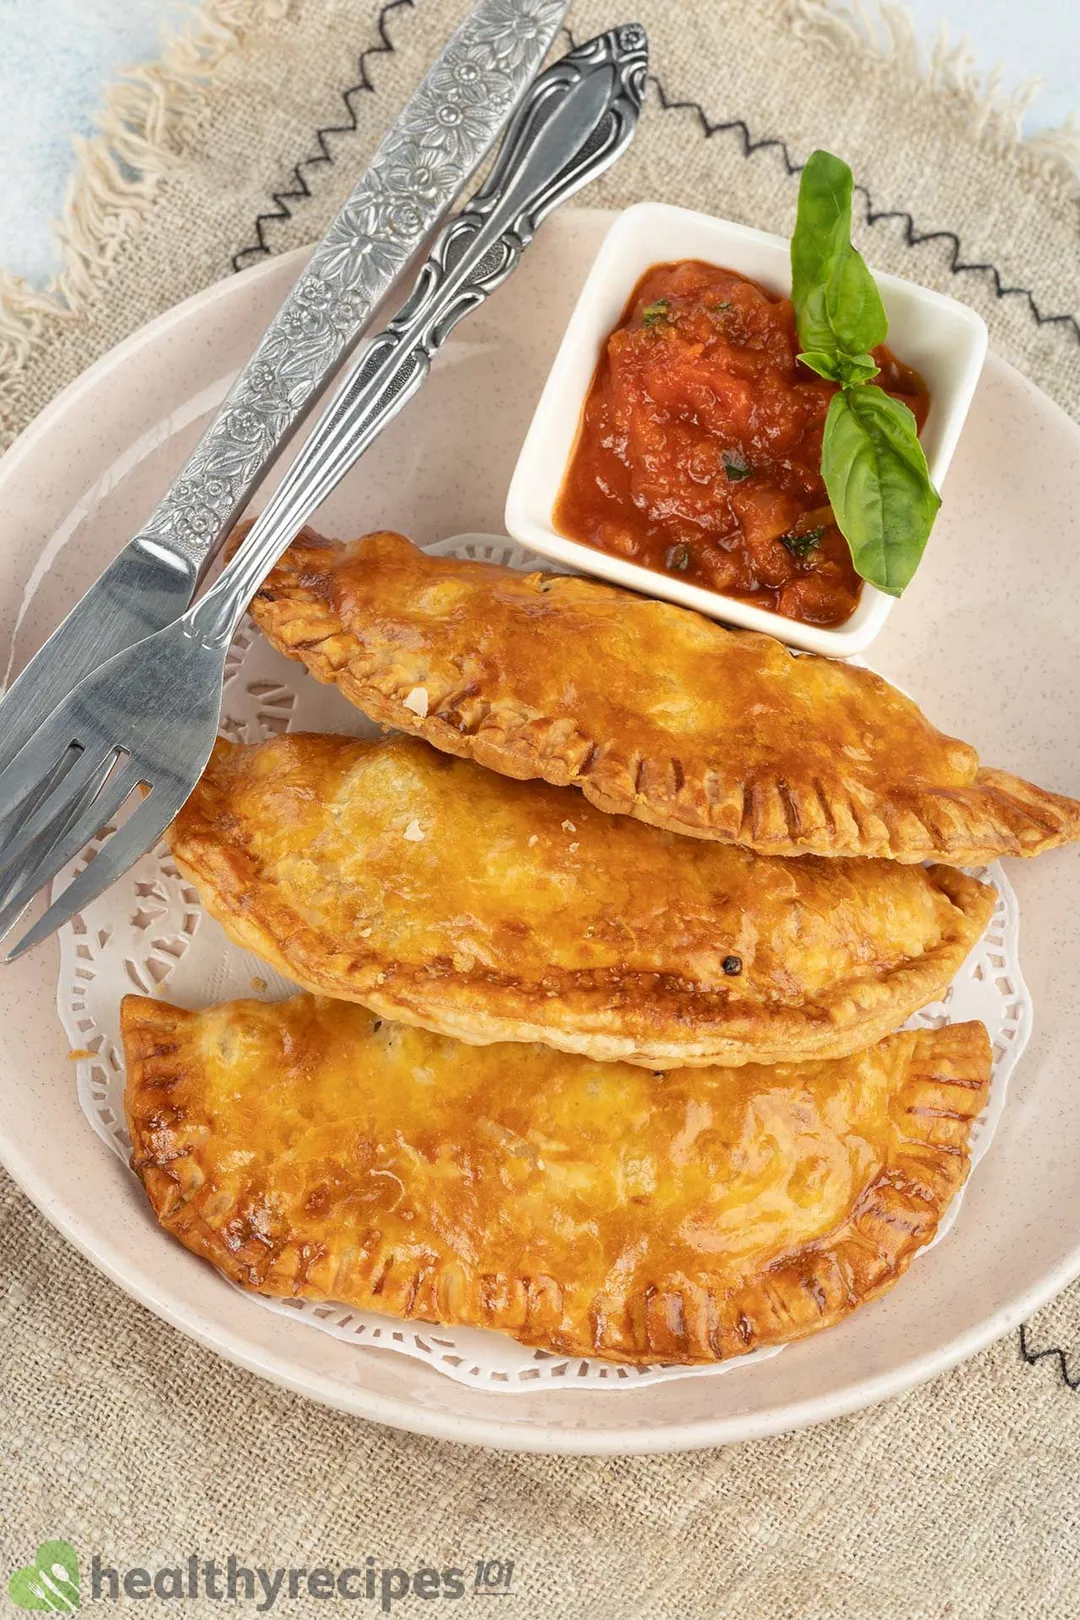 three empanadas on a plate next to small bowl of red sauce